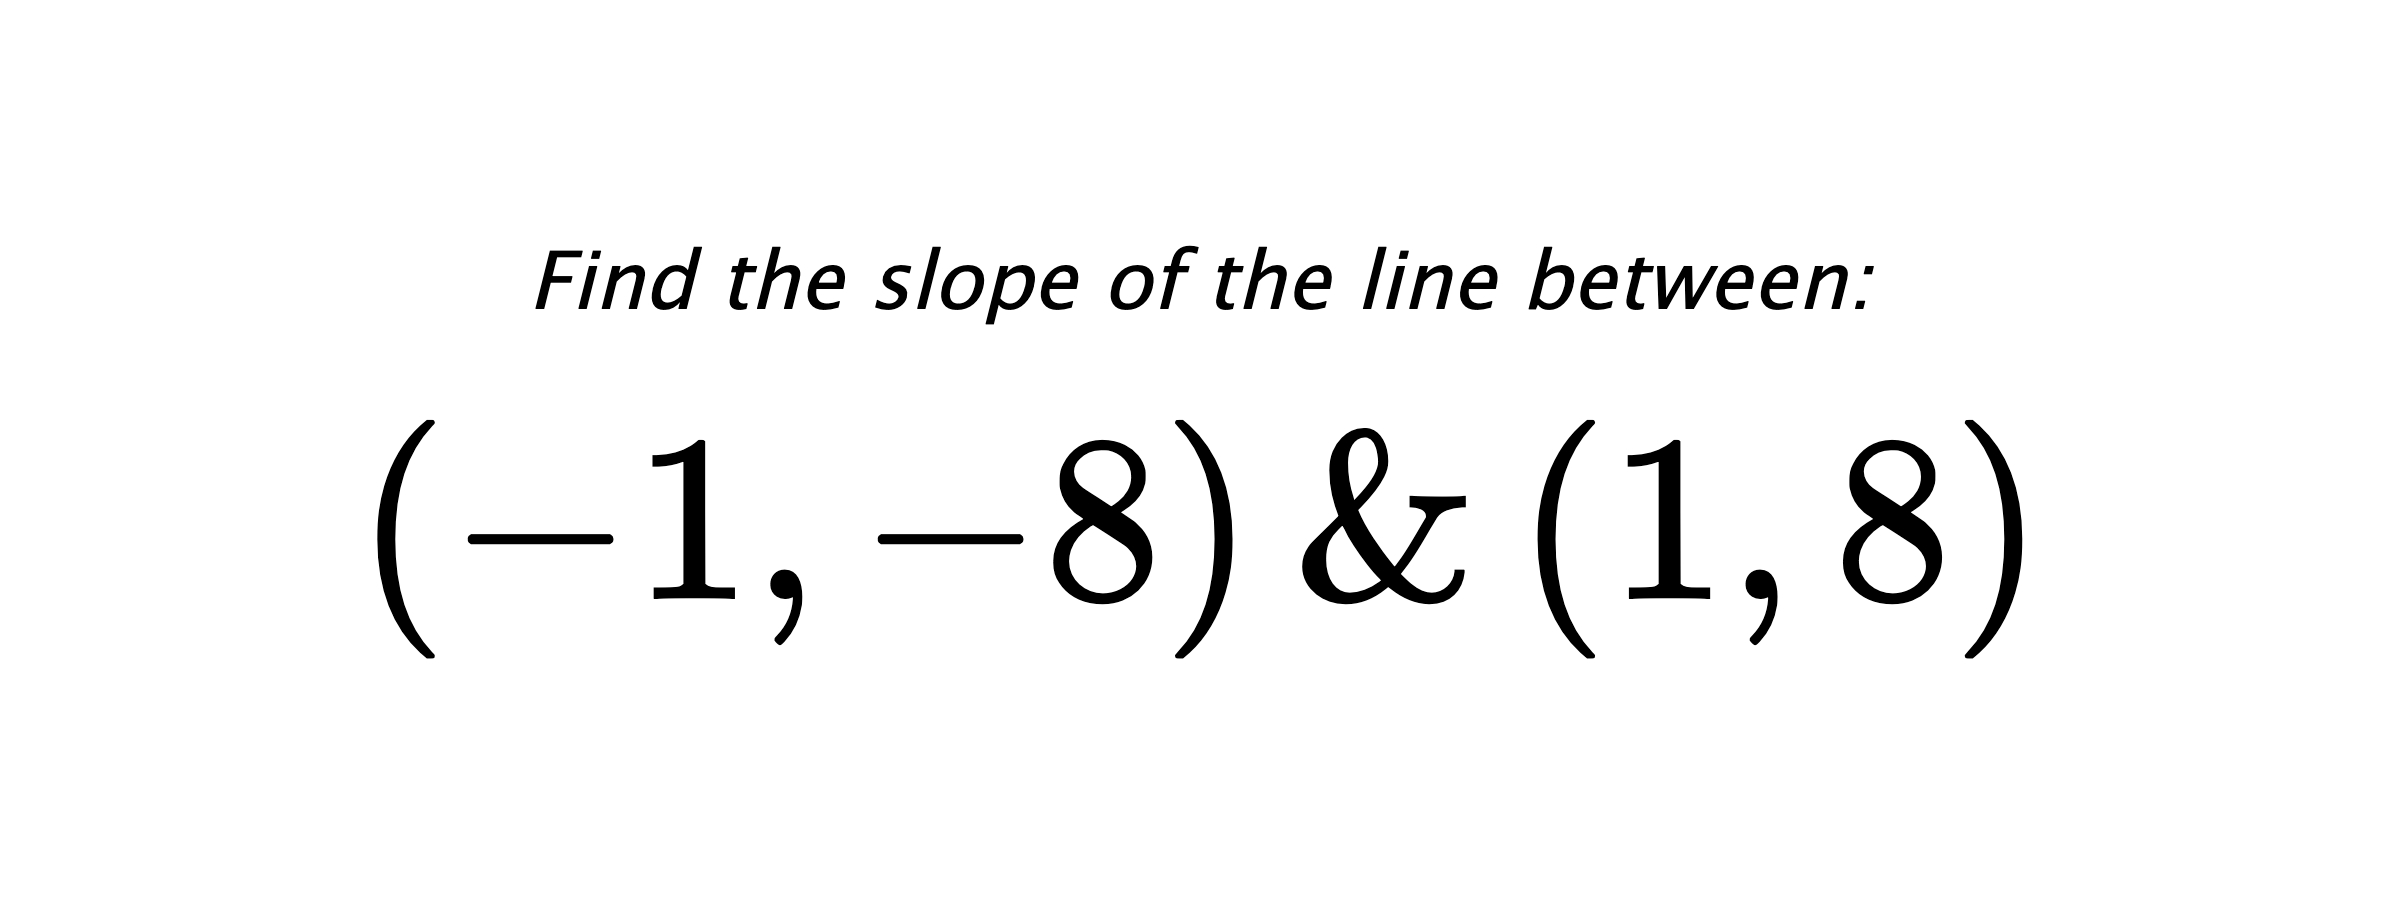 Find the slope of the line between: $ (-1,-8) \hspace{0.5cm} \text{&} \hspace{0.5cm} (1,8) $